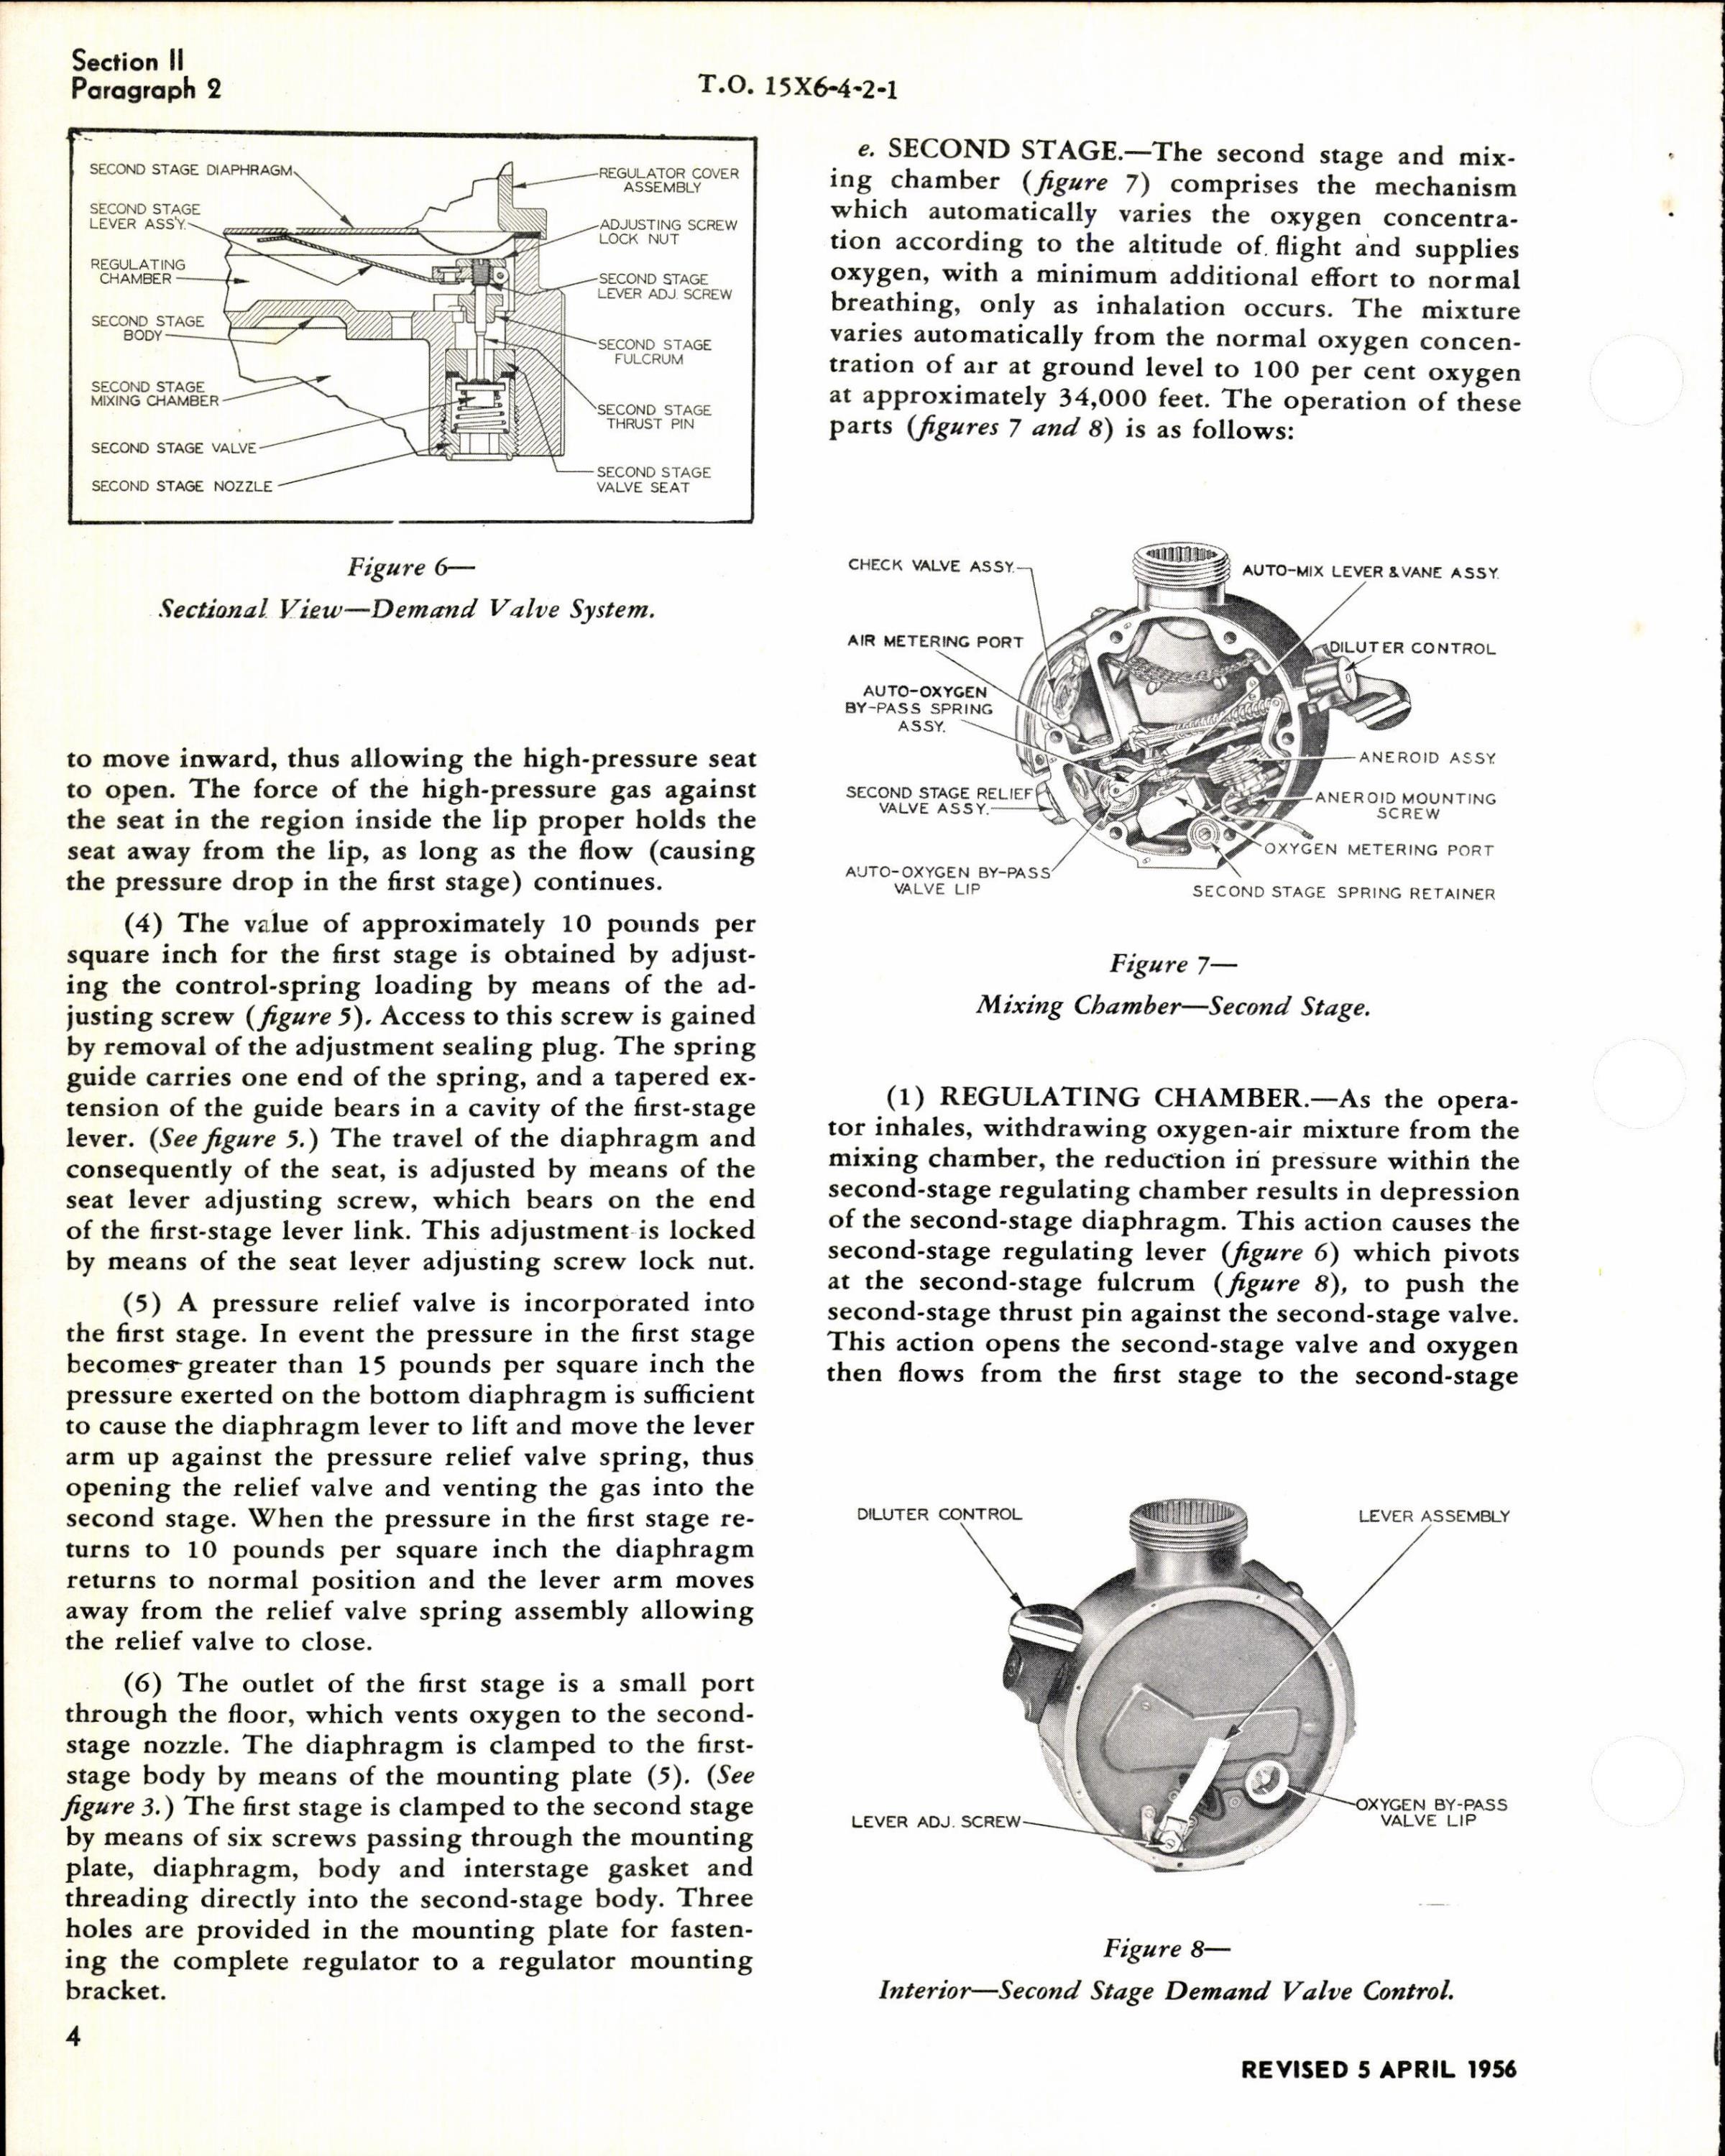 Sample page 4 from AirCorps Library document: Operation, Service, & Overhaul Inst w/ Parts Catalog for Pressure Breathing Diluter Demand Oxygen Regulator Type A-14